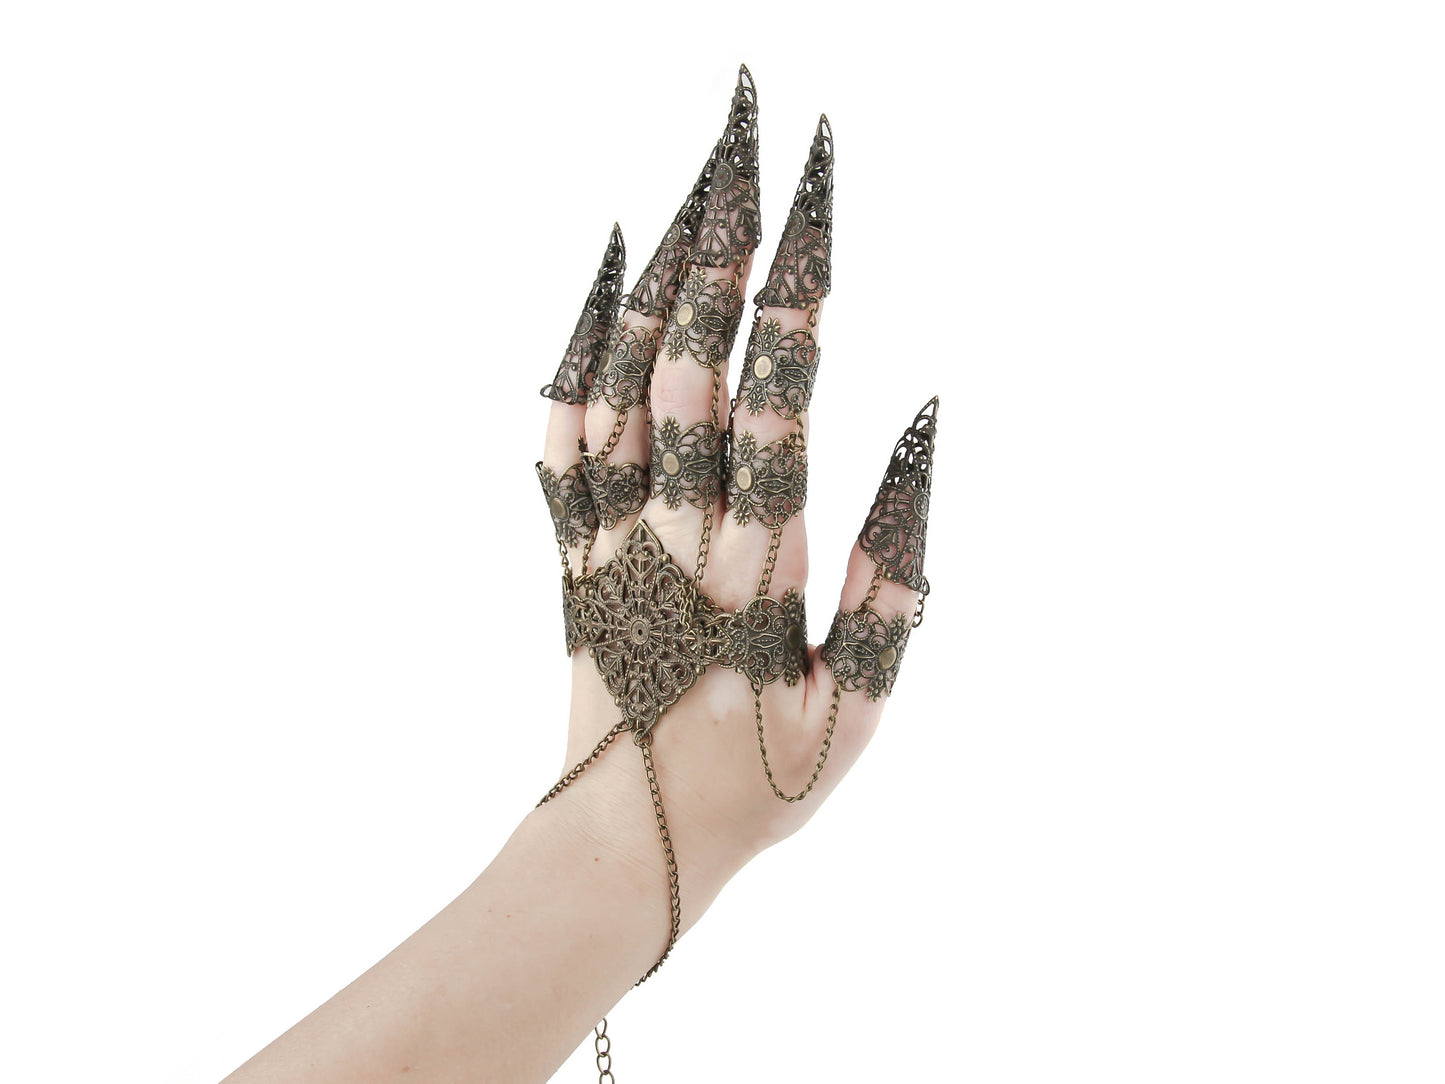 Elevate your style with Myril Jewels' full hand metal glove, featuring ornate bronze claw rings. This neo-gothic creation is perfect for those who love dark, avant-garde jewelry, making it an ideal choice for Halloween, rave parties, or as a distinctive gift for the goth girlfriend.